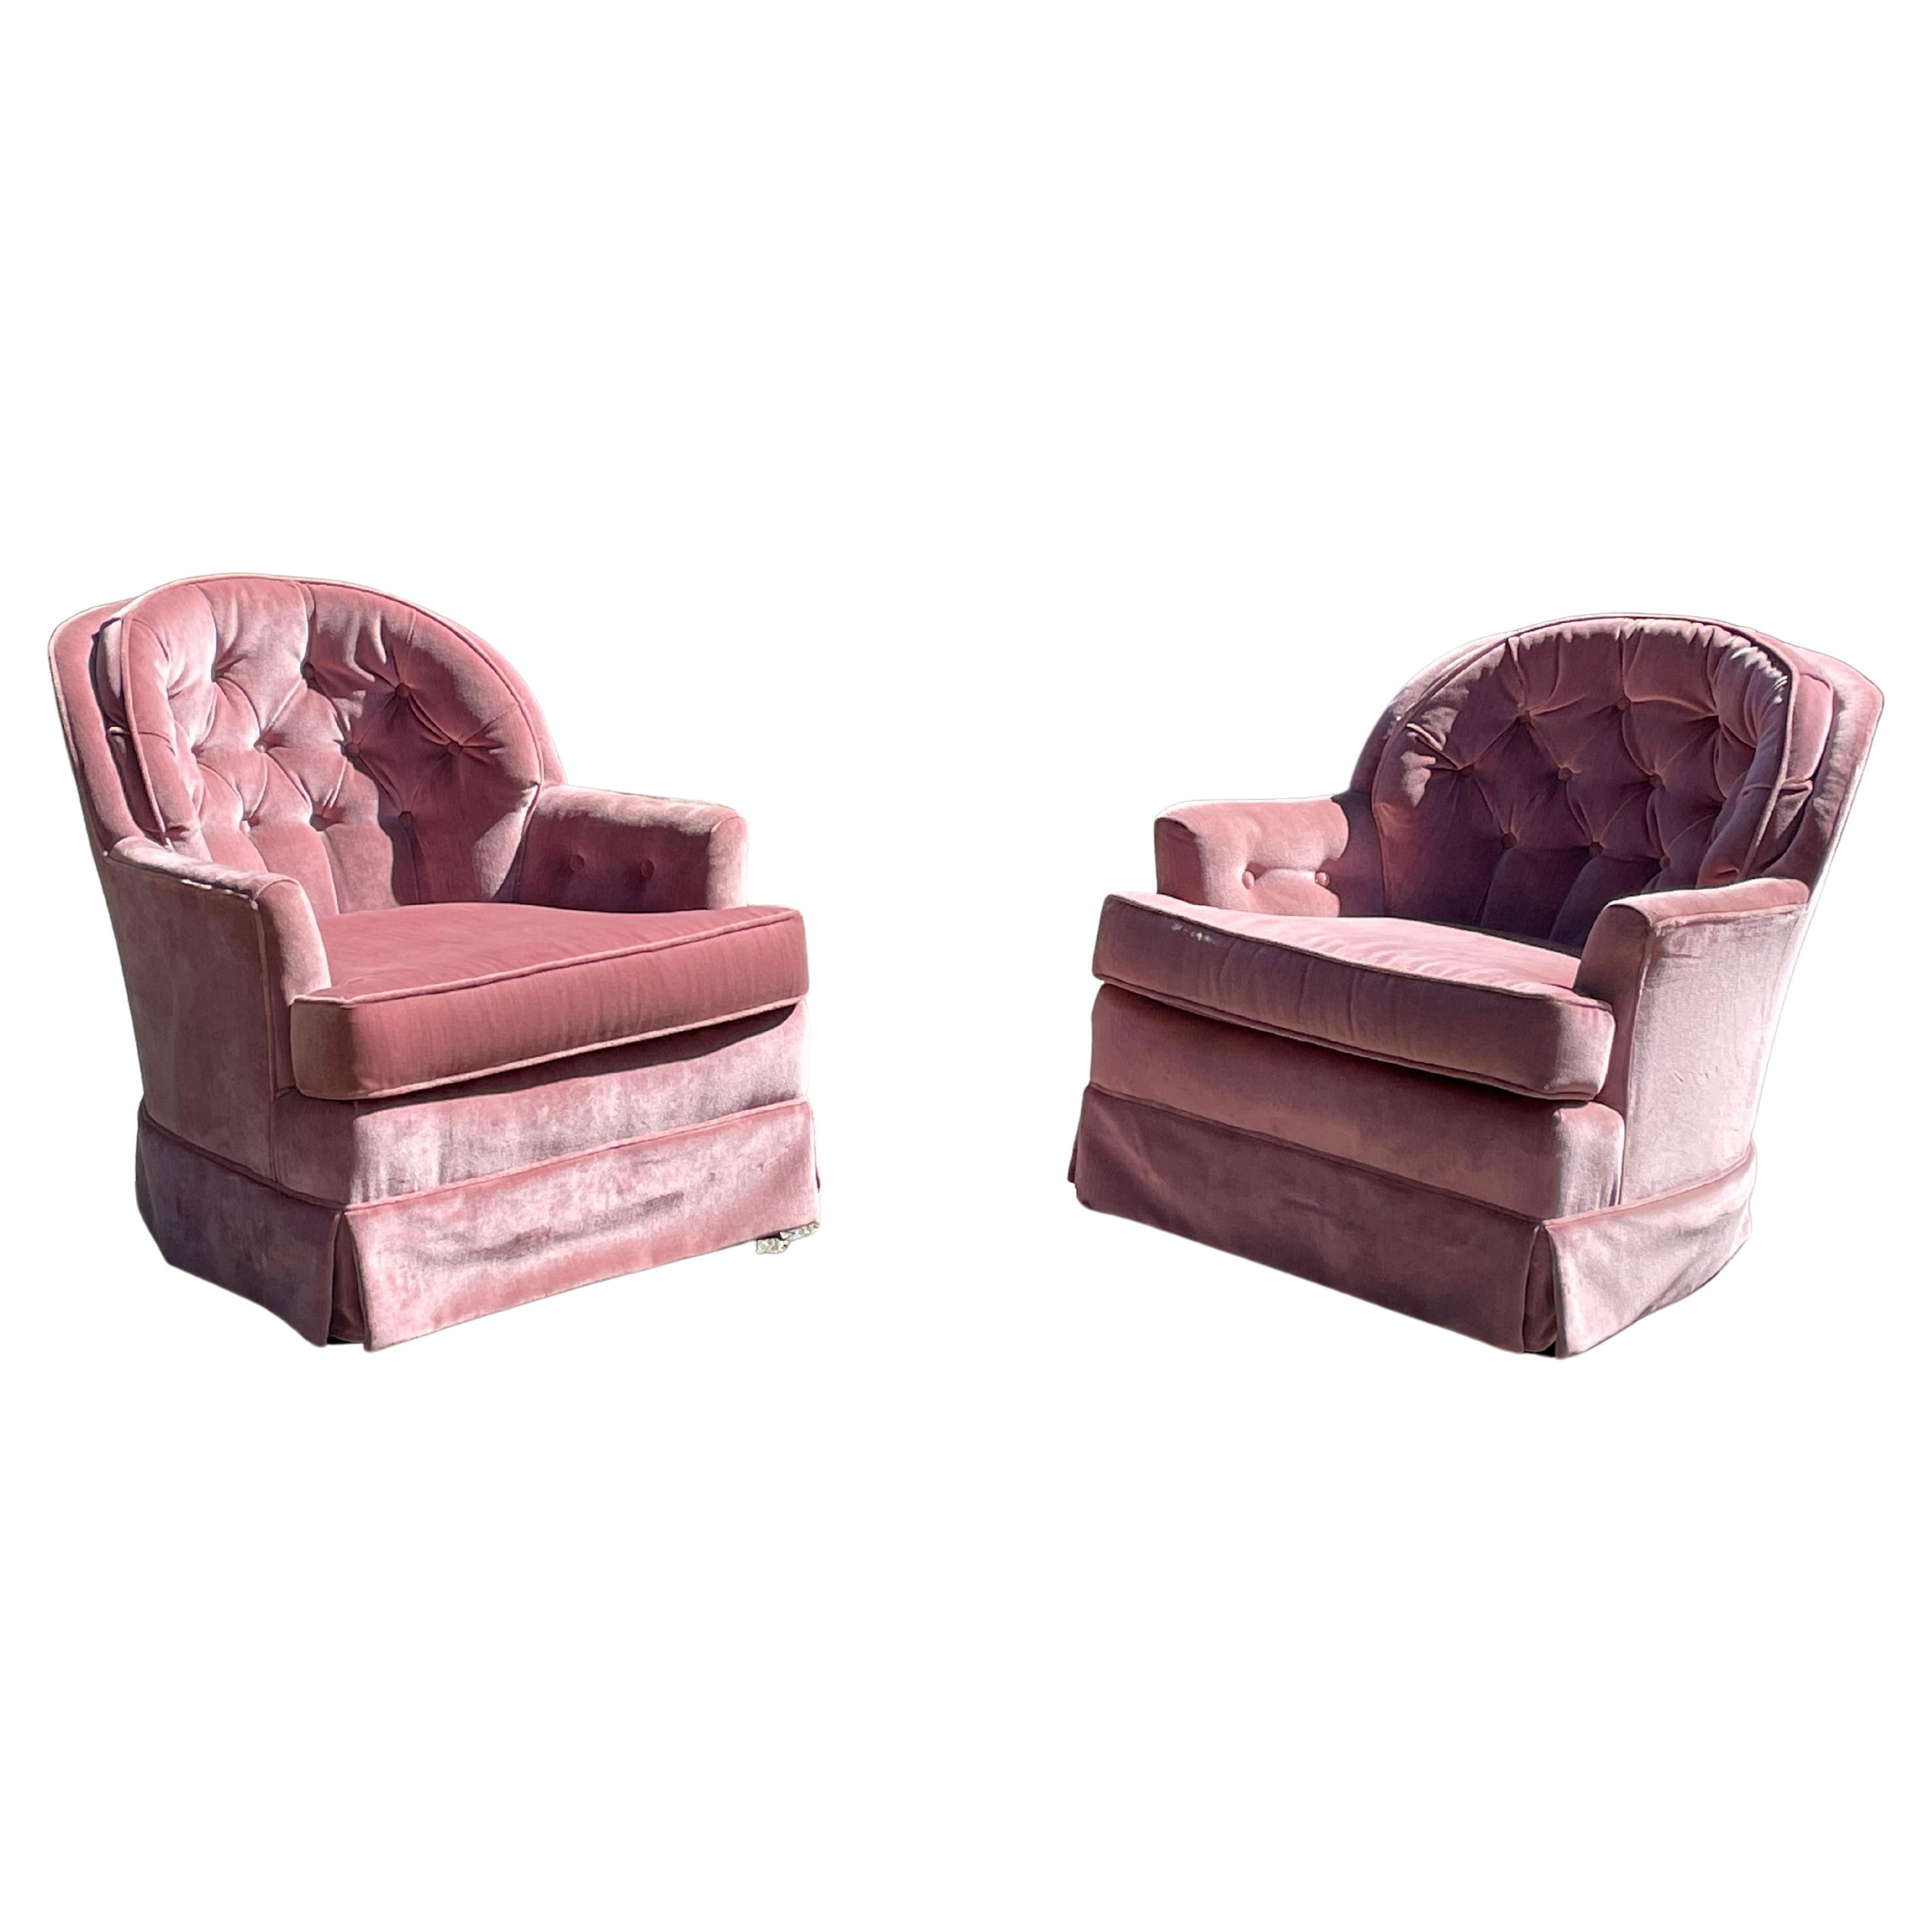 Pair of vintage 1960s classic pink swivel chairs. Gorgeous original crushed velvet. They swivel and rock. Petite size. Glamorous. Hollywood Regency. Very comfortable.

Original fabric is in nearly pristine condition. They are in near mint